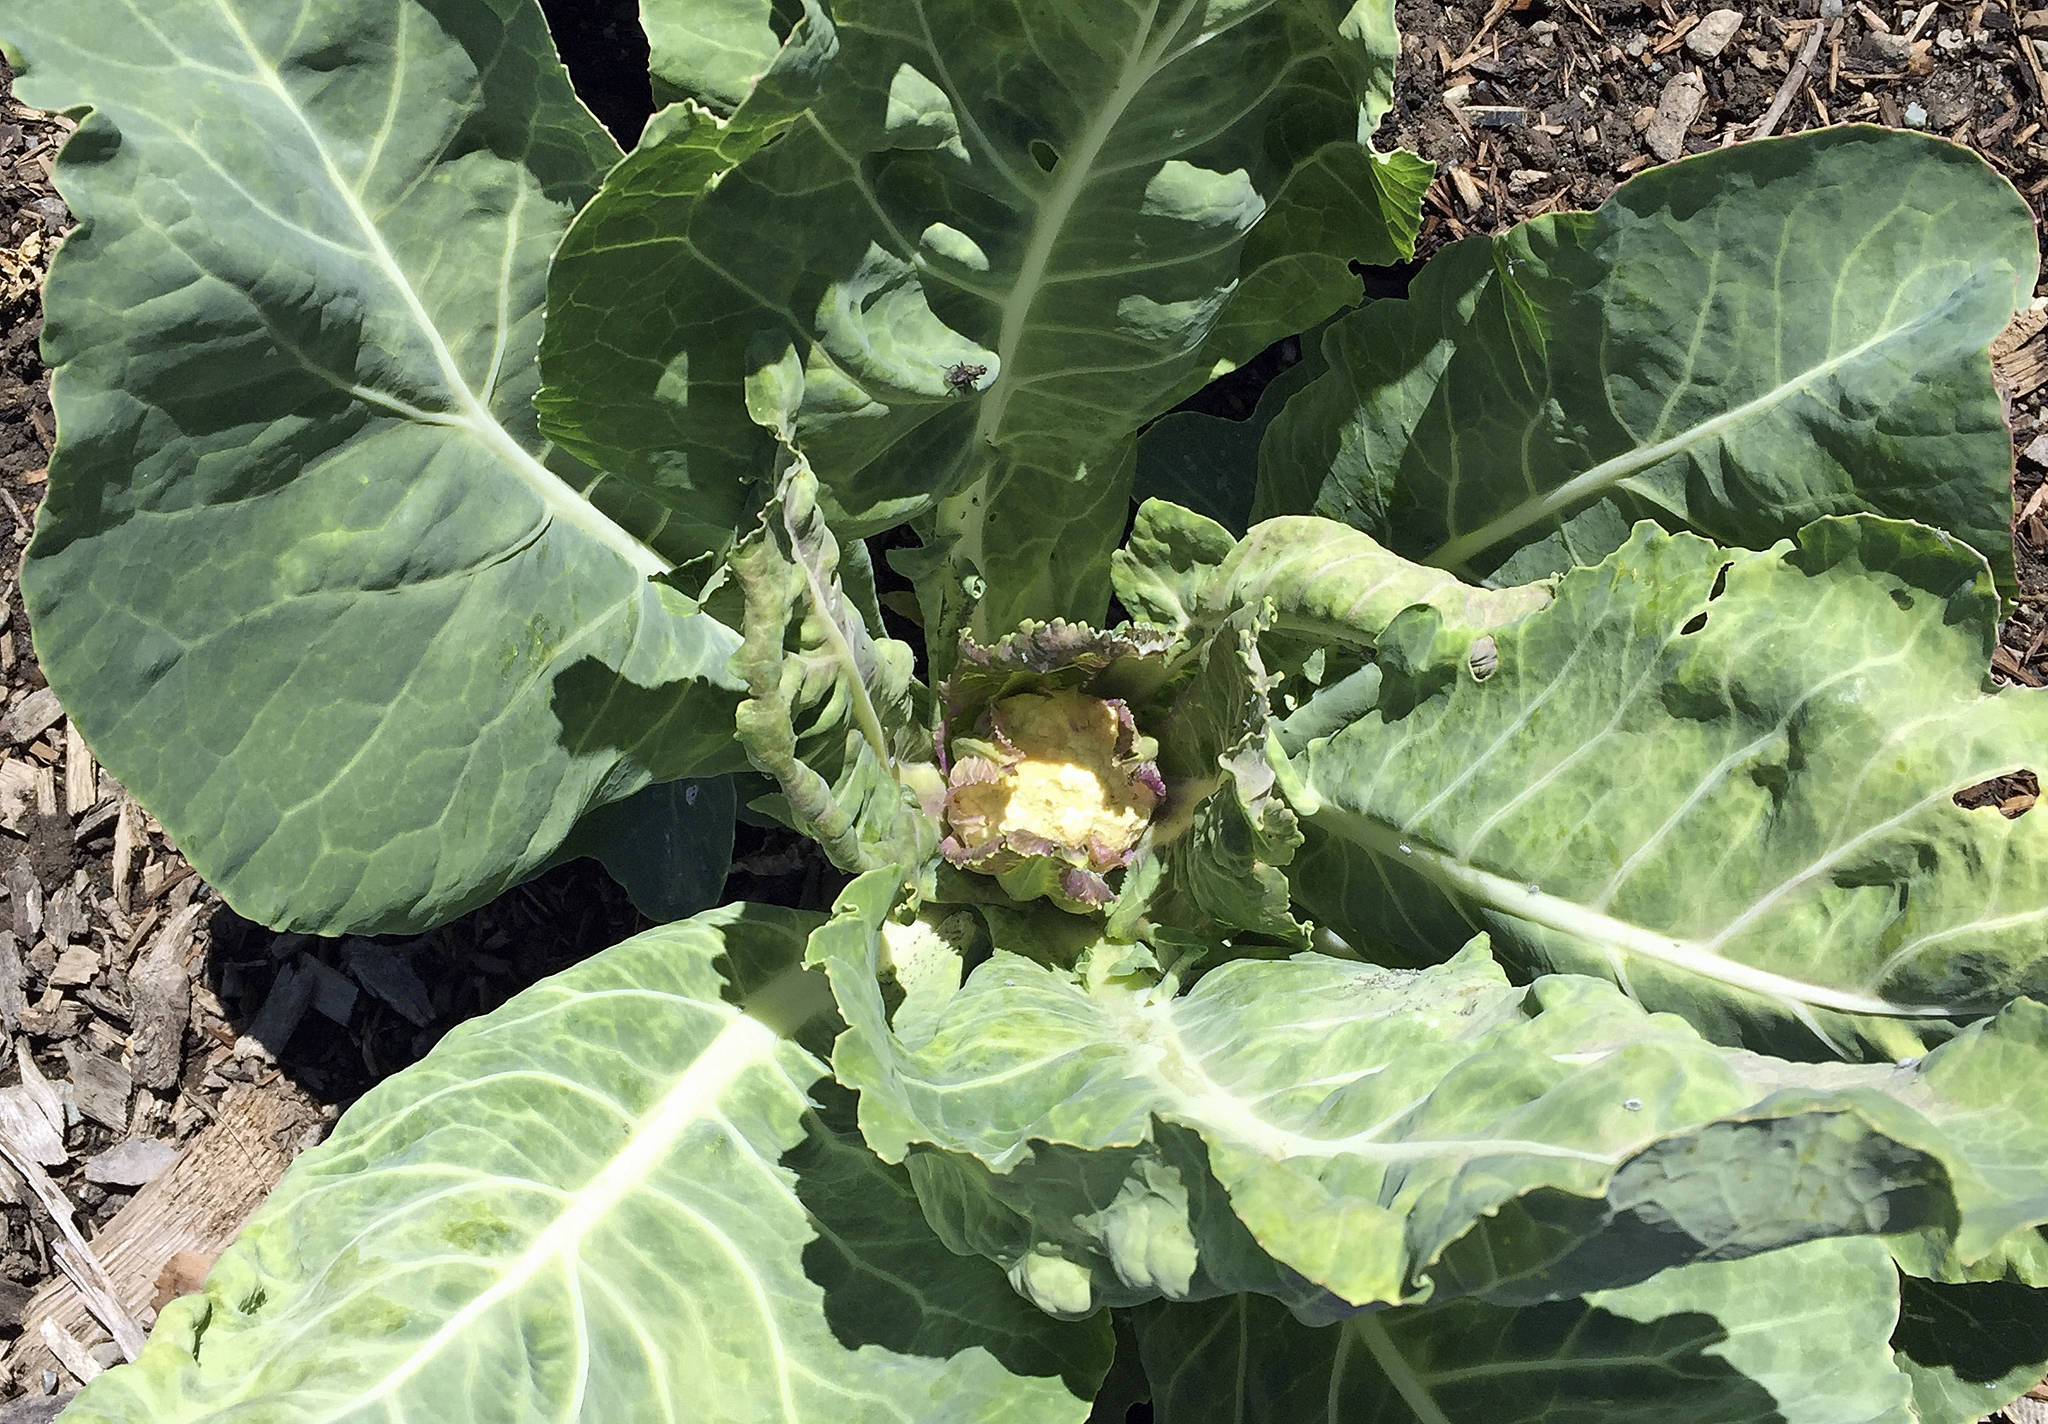 Photo by Harry Anderson                                Cauliflower develops large tough leaves to protect the young head.